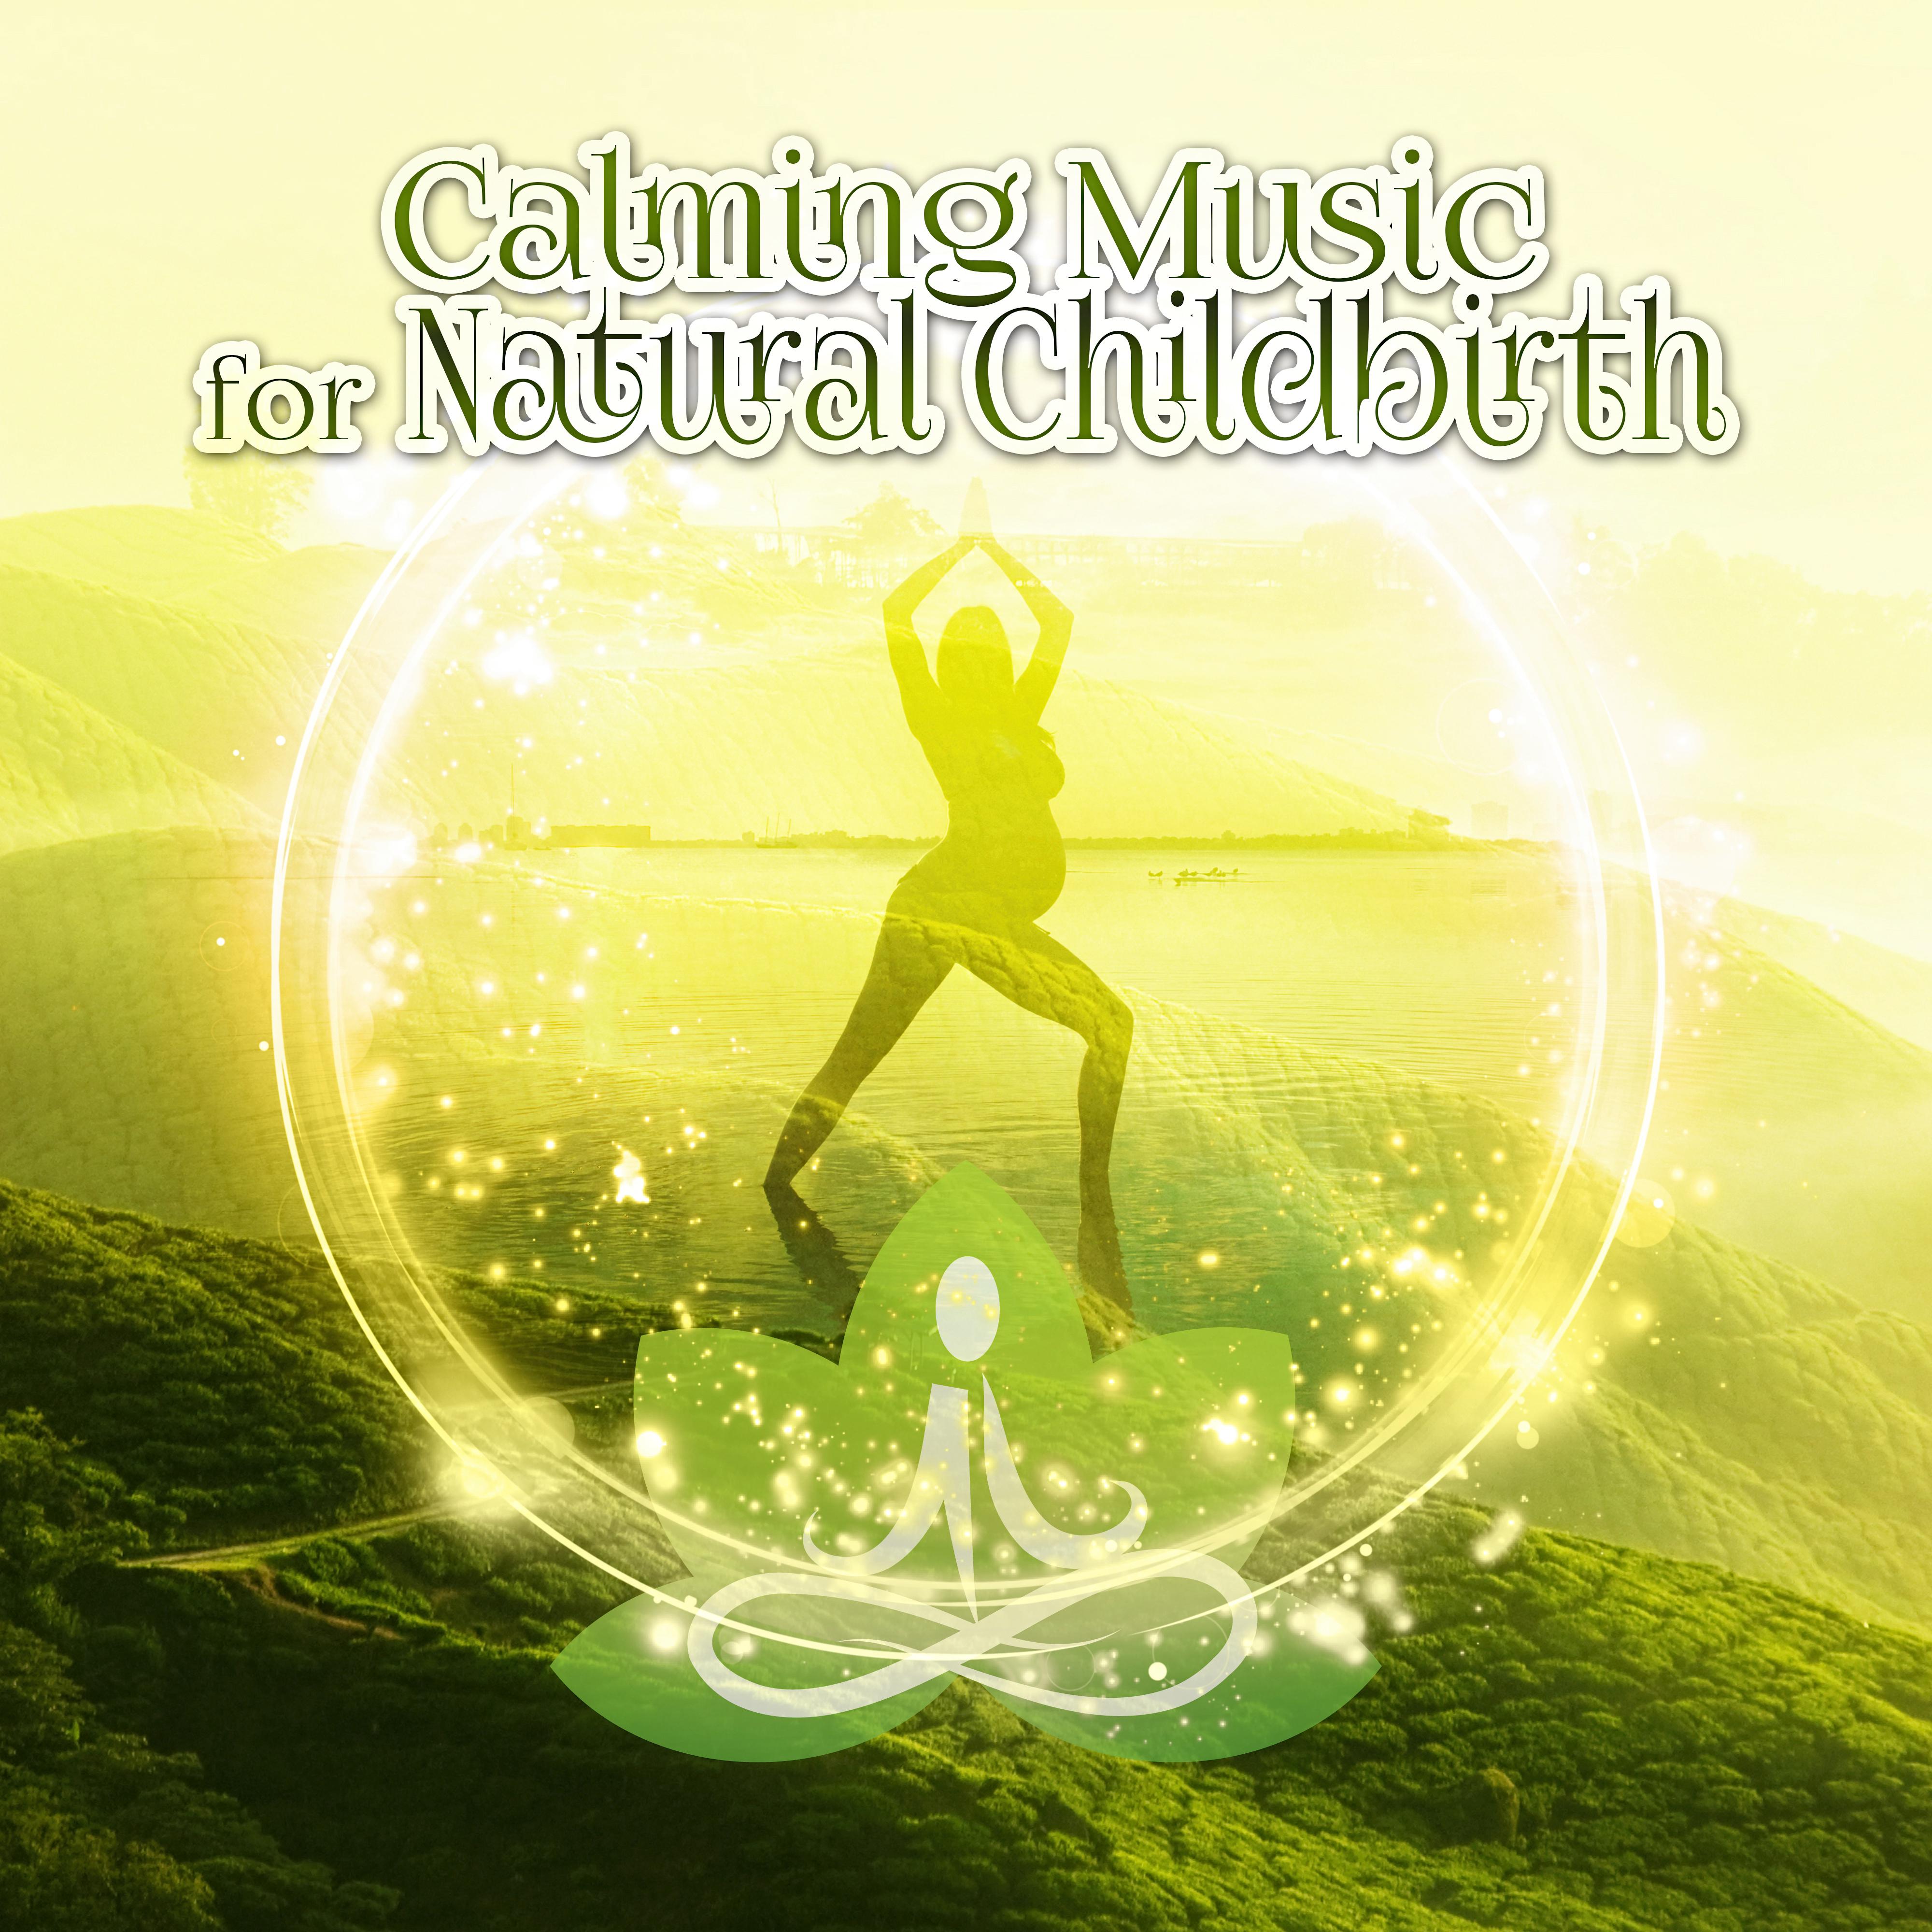 Background Music for Pregnant Mothers